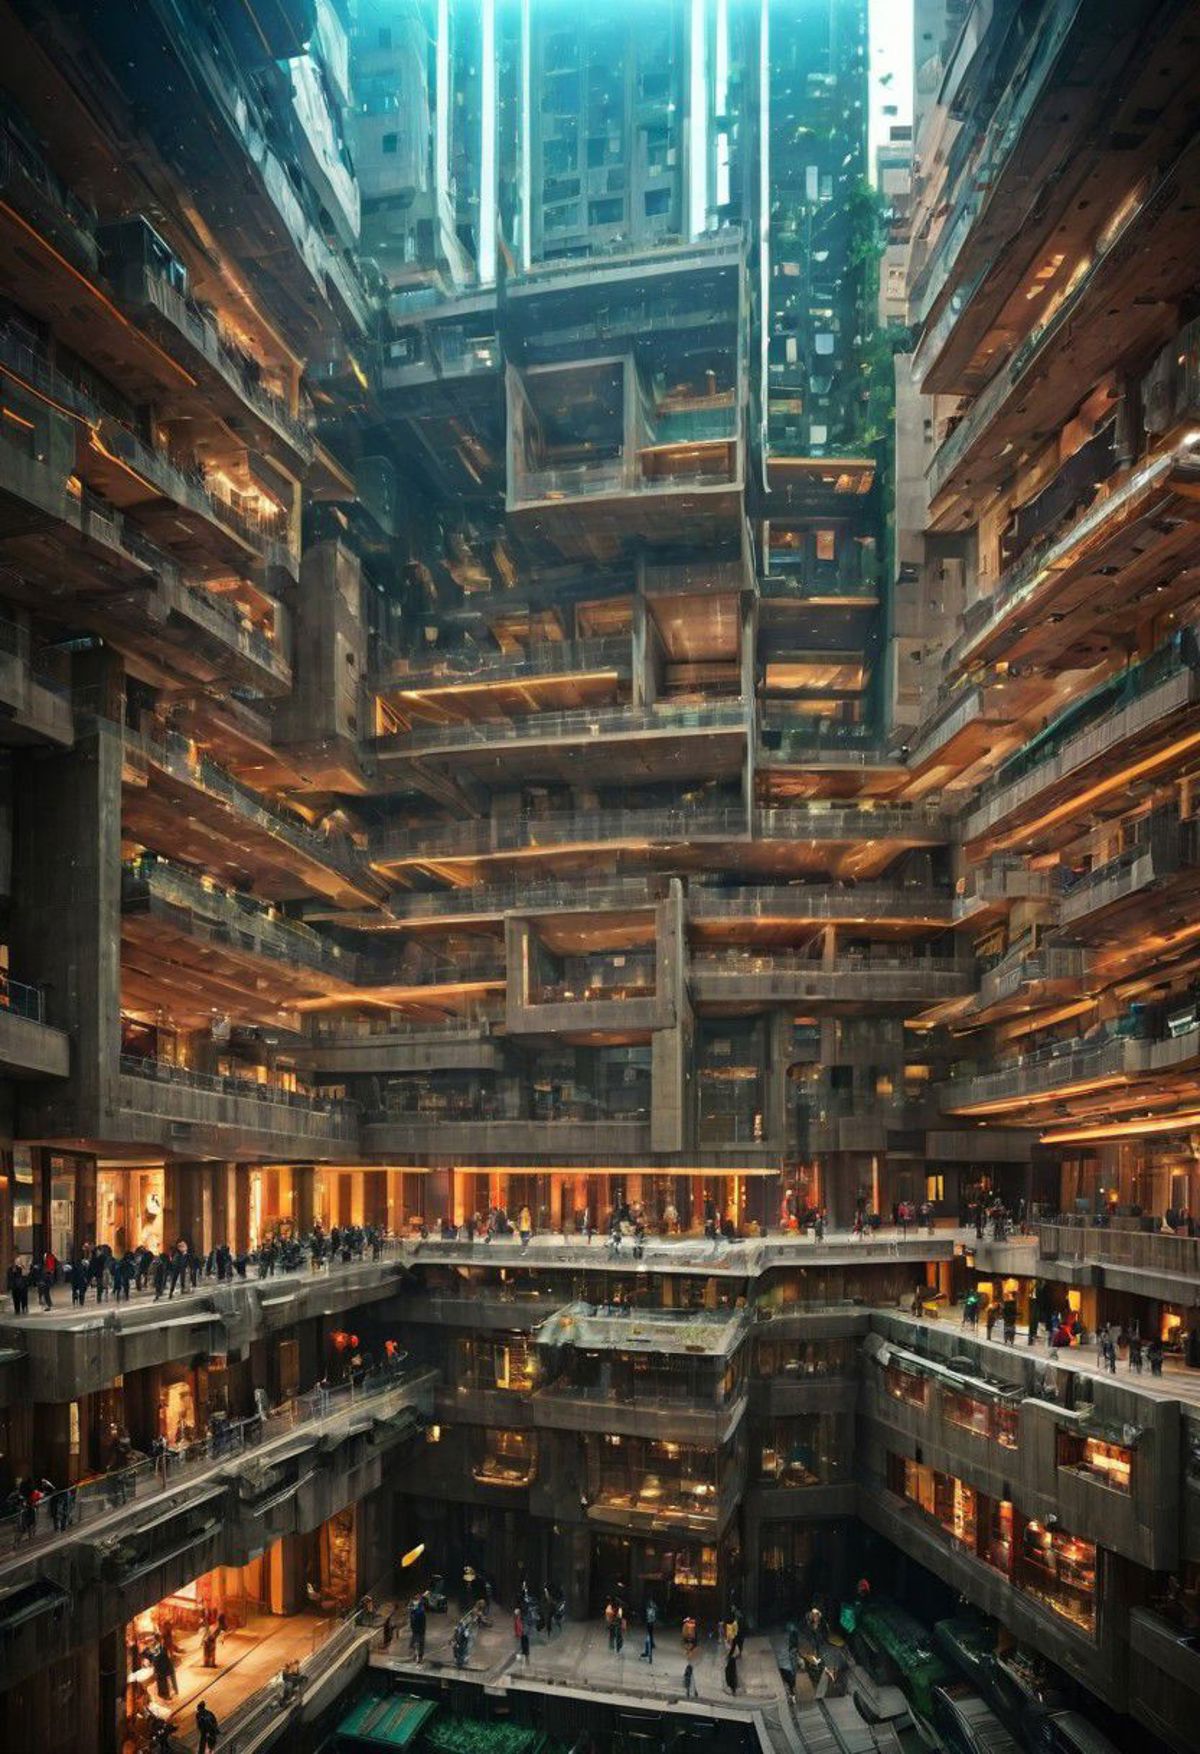 A large group of people in a multi-story building.